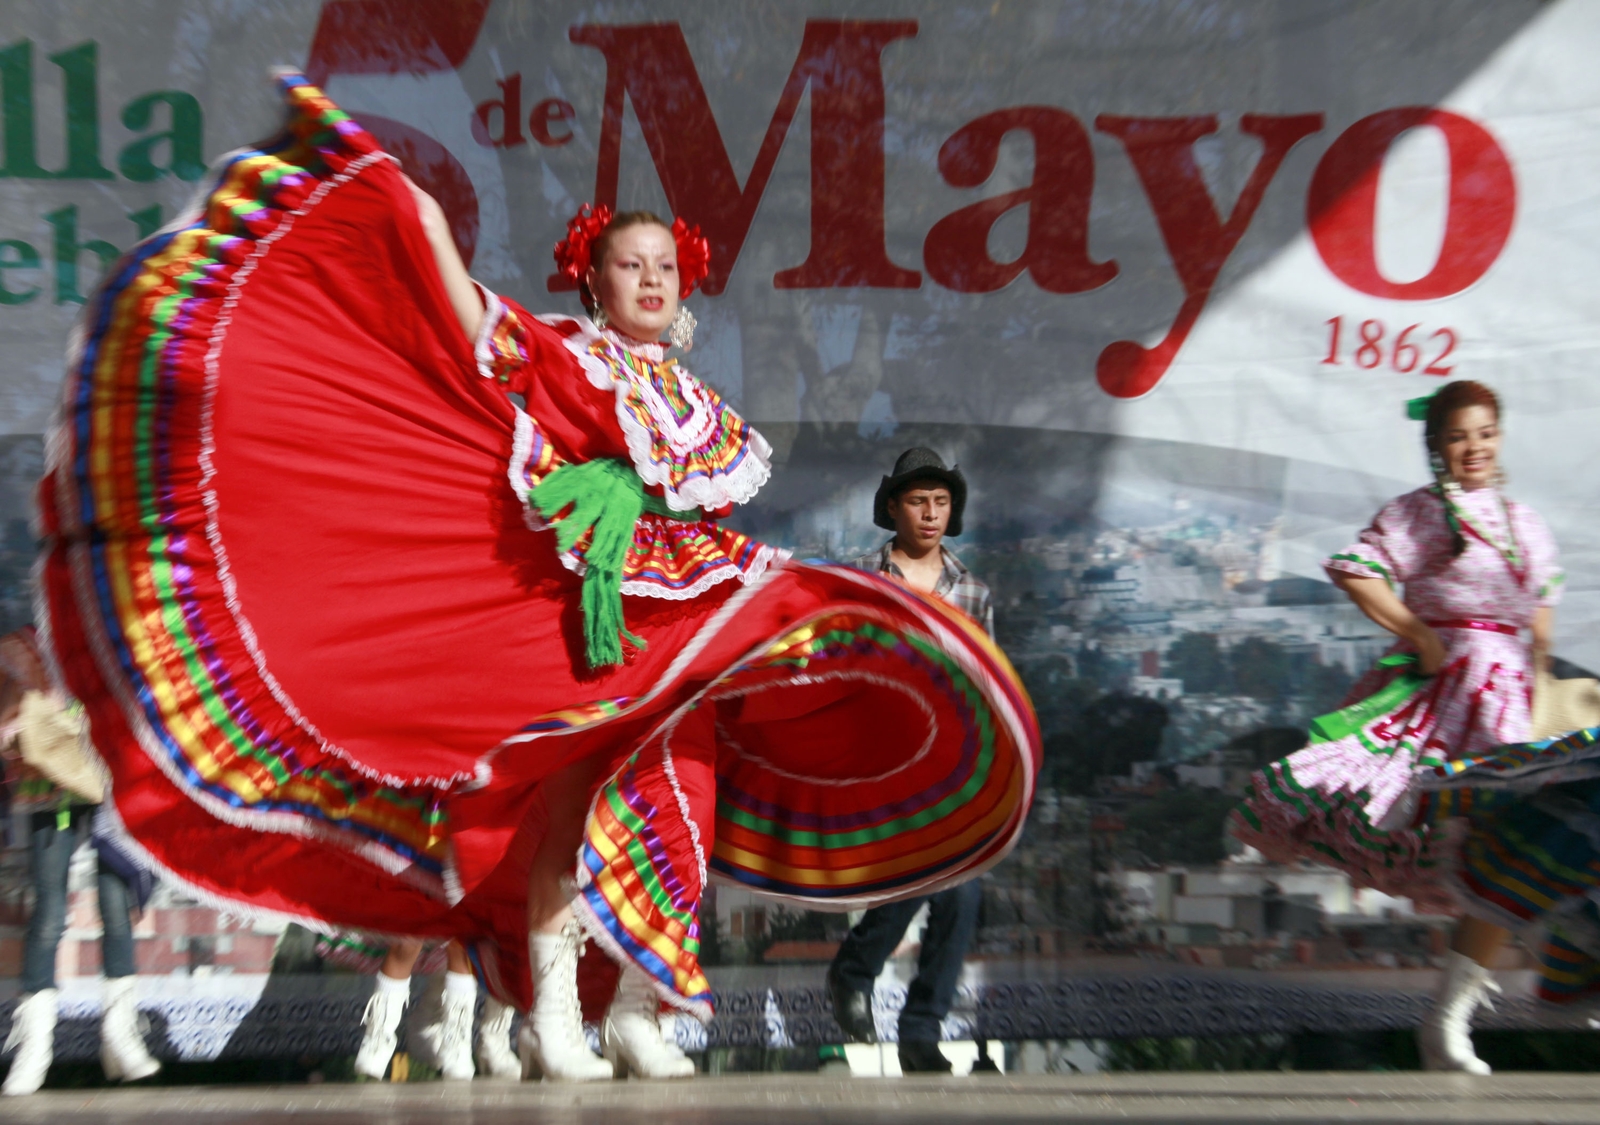 it’s-cinco-de-mayo-time,-and-festivities-are-planned-across-the-us.-but-in-mexico,-not-so-much